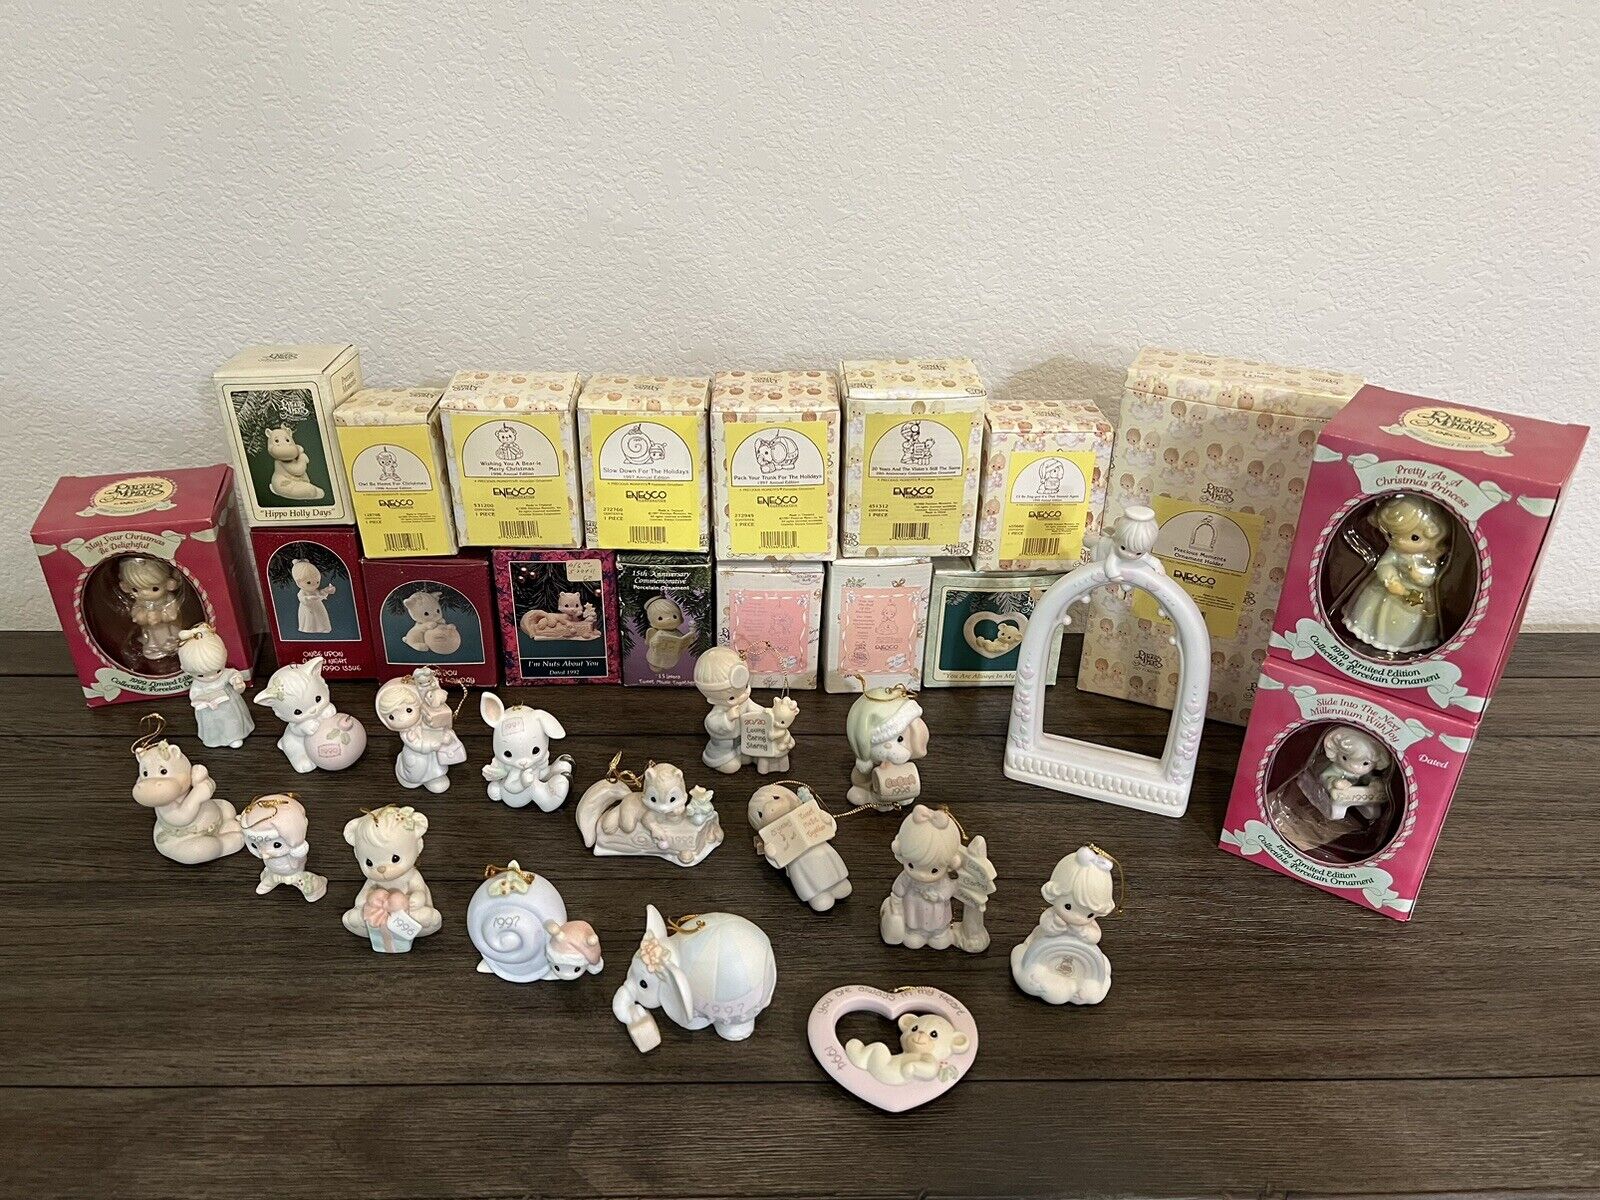 Precious Moments Ornaments 1990’s Lot Of 20. Some Limited Editions & Anniversary